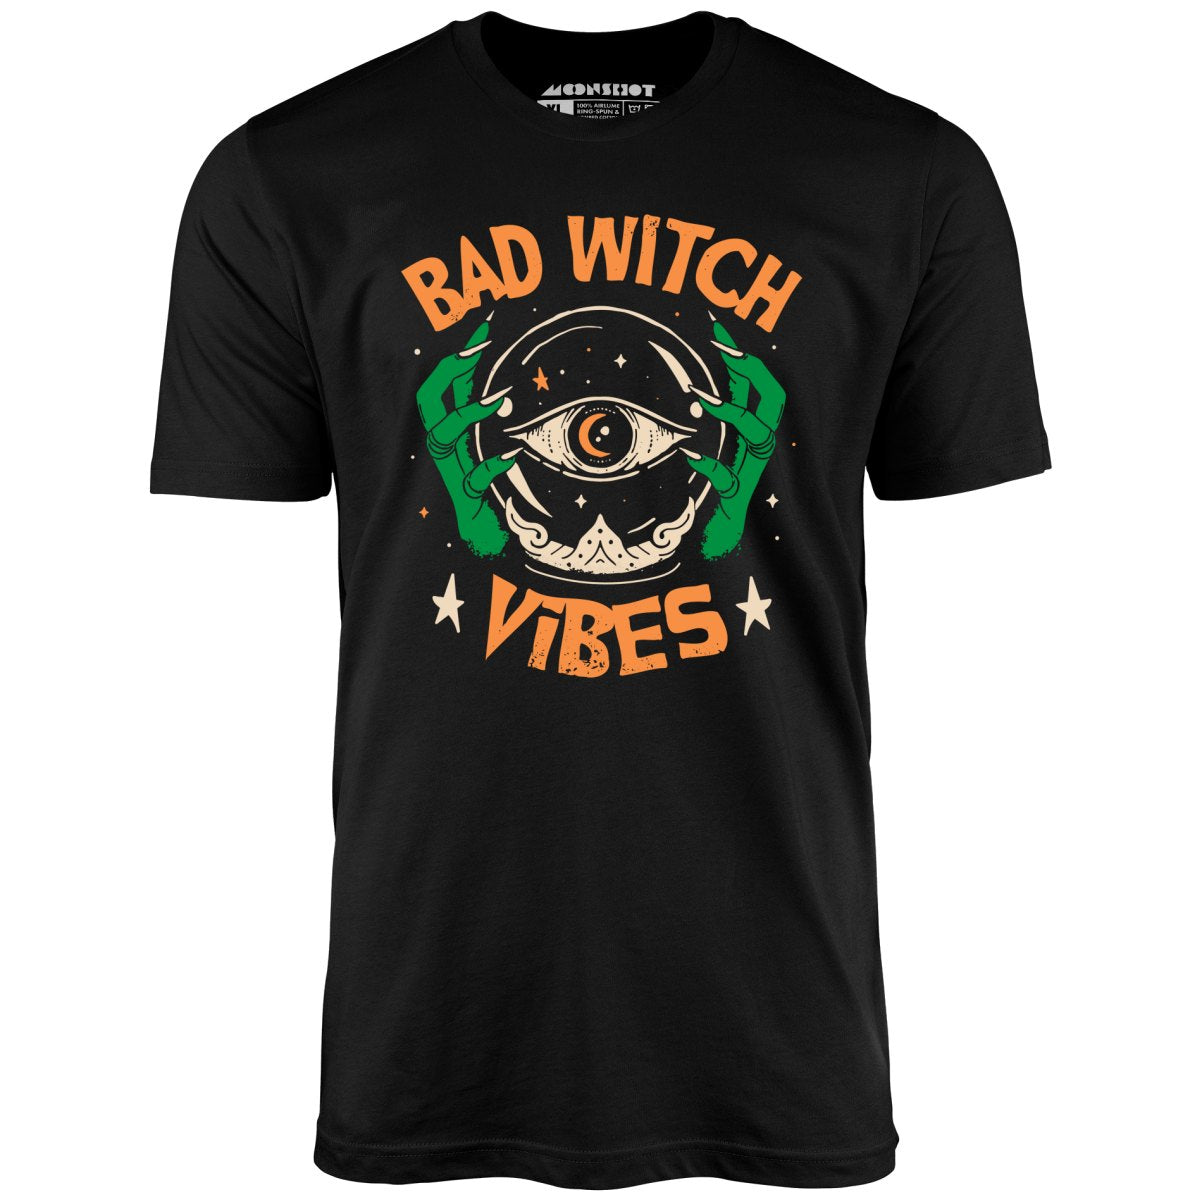 Bad Witch Vibes - Unisex T-Shirt